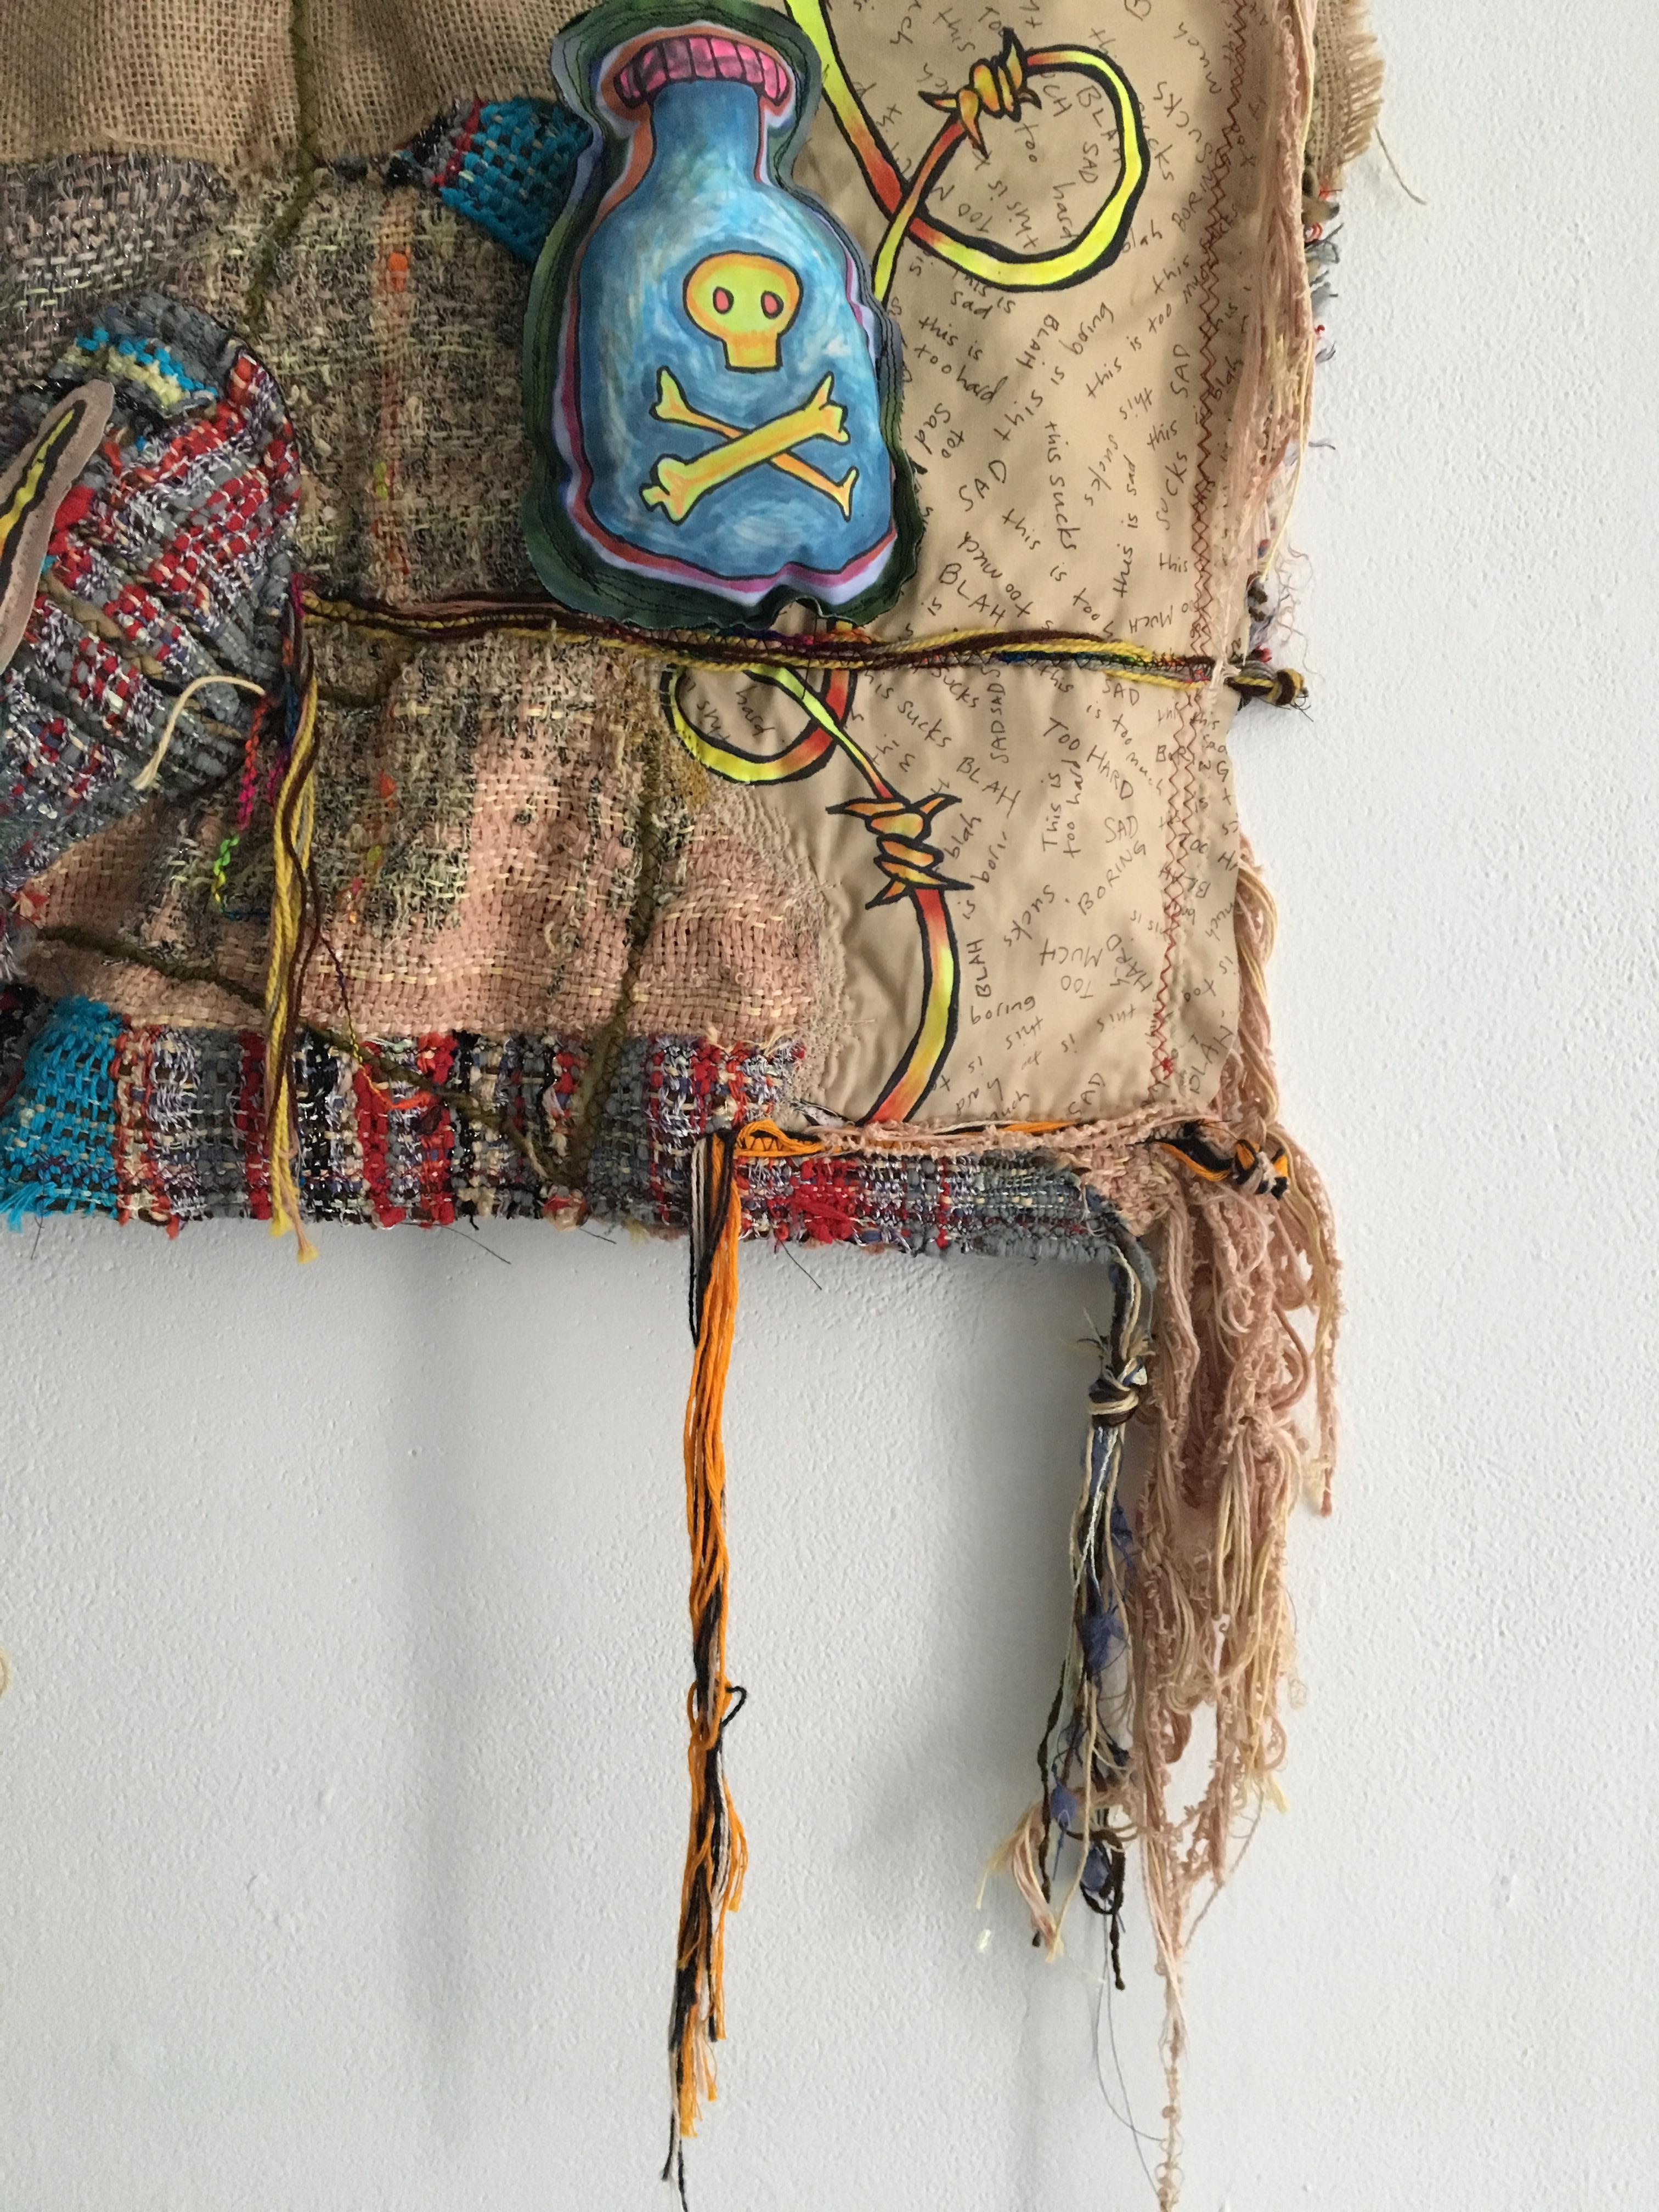 Textile Handwoven Wall Hanging: 